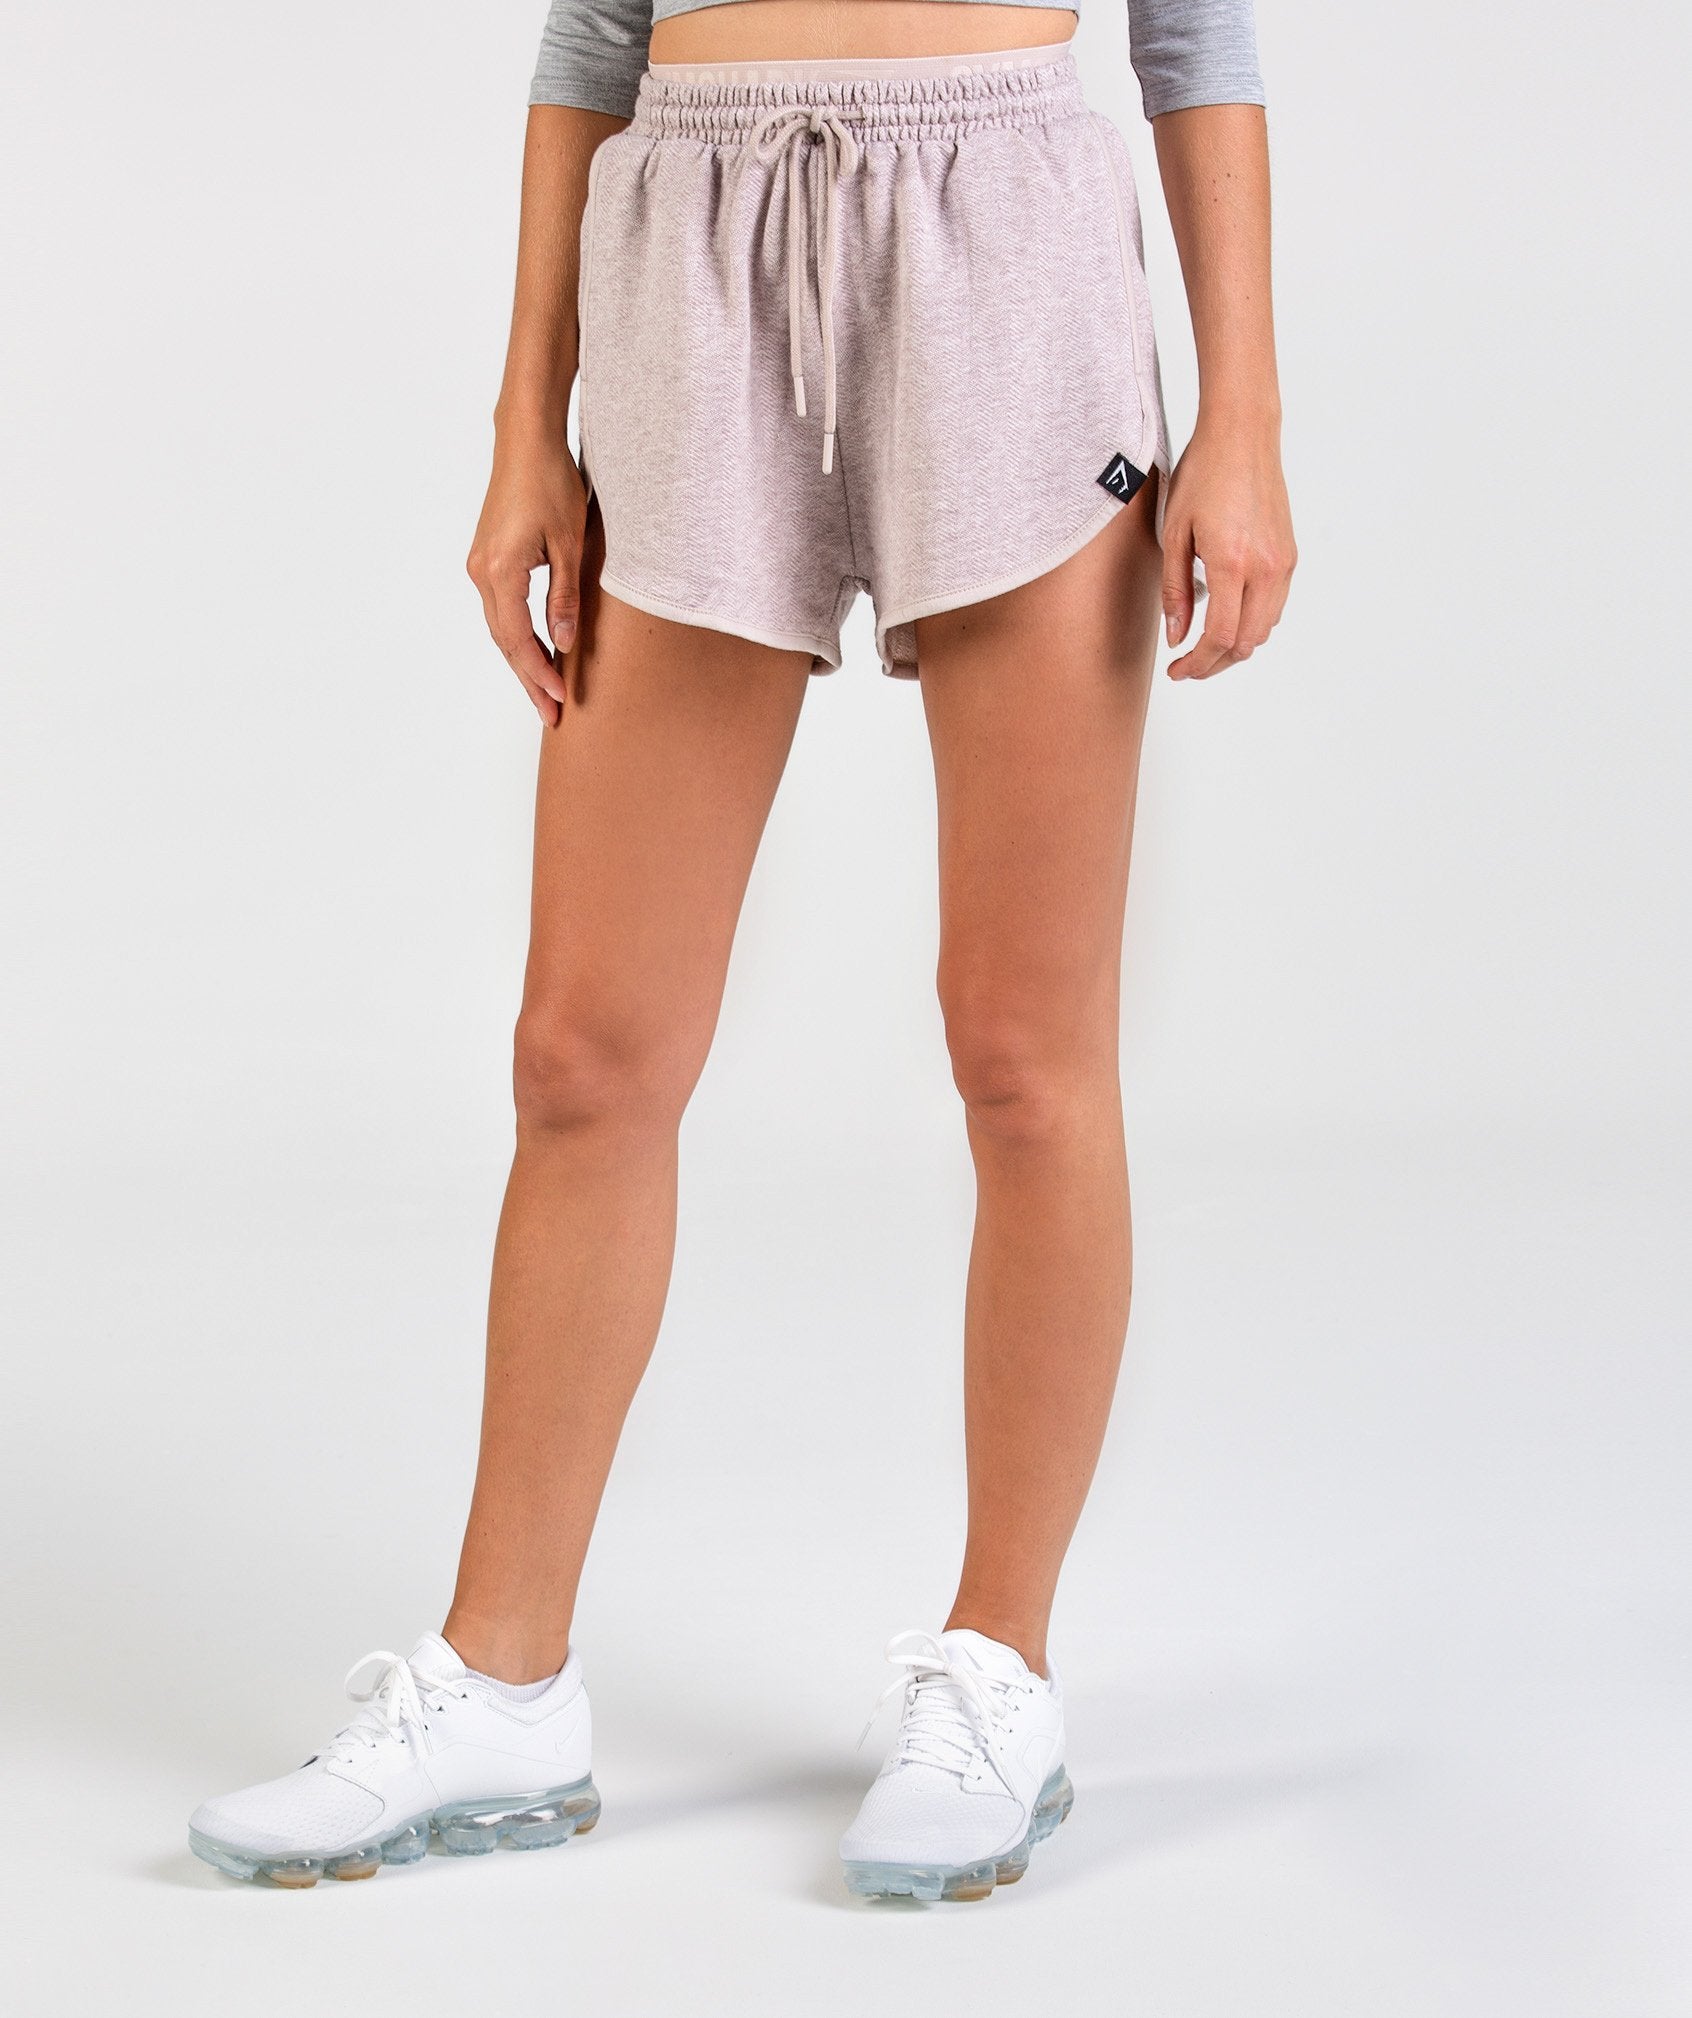 Heather Dual Band Shorts in Taupe Marl - view 4